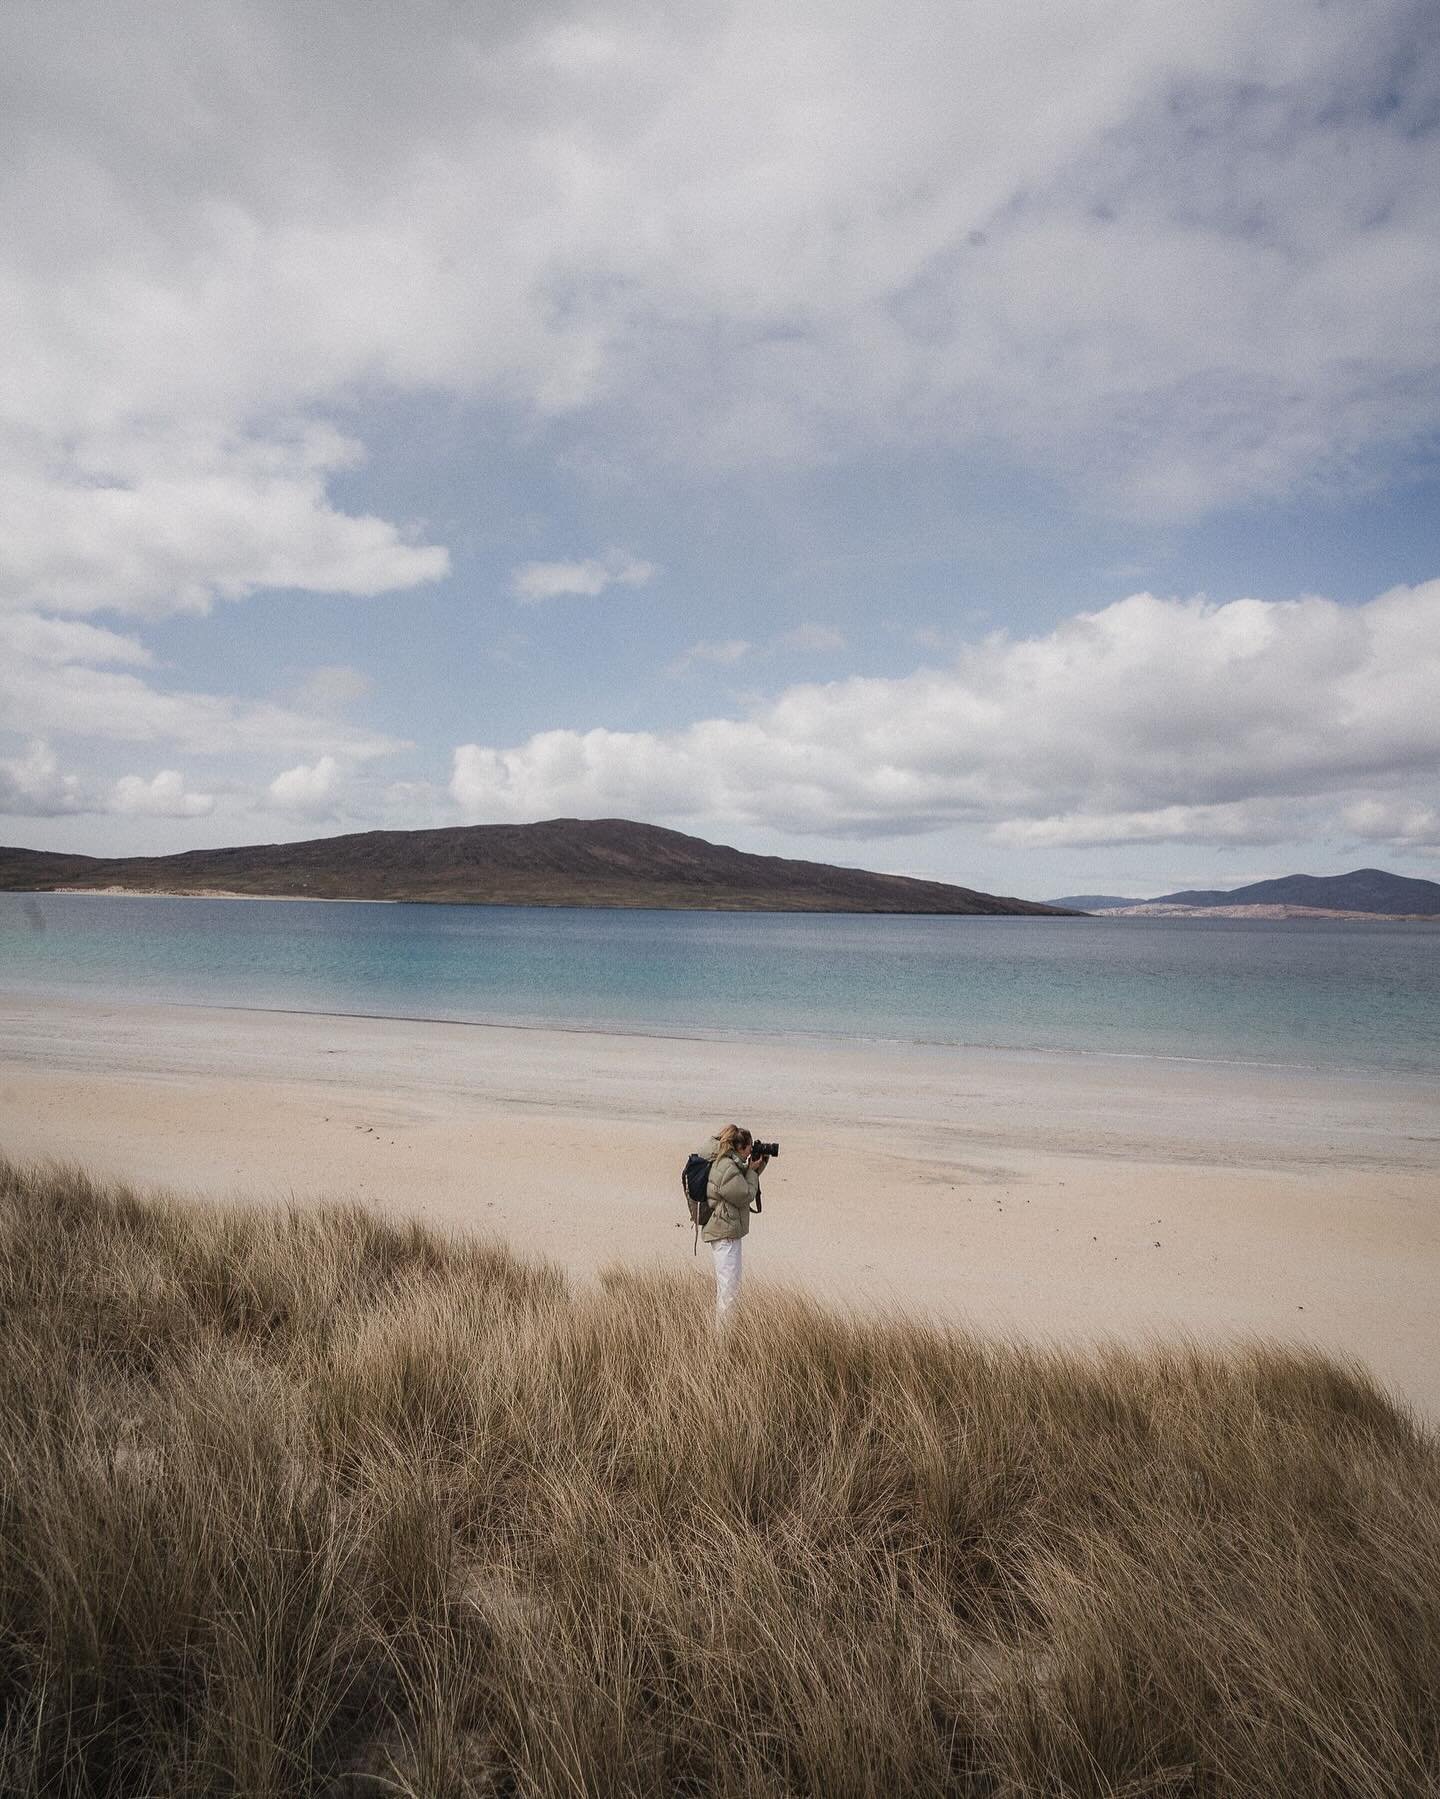 Places to save for UK summer plan making.

Here are some locations we have visited over the past few summers and loved:

1: The Outer Hebrides - Just about as epic as the UK gets. This is a place we&rsquo;ve been lucky enough to visit twice now and b